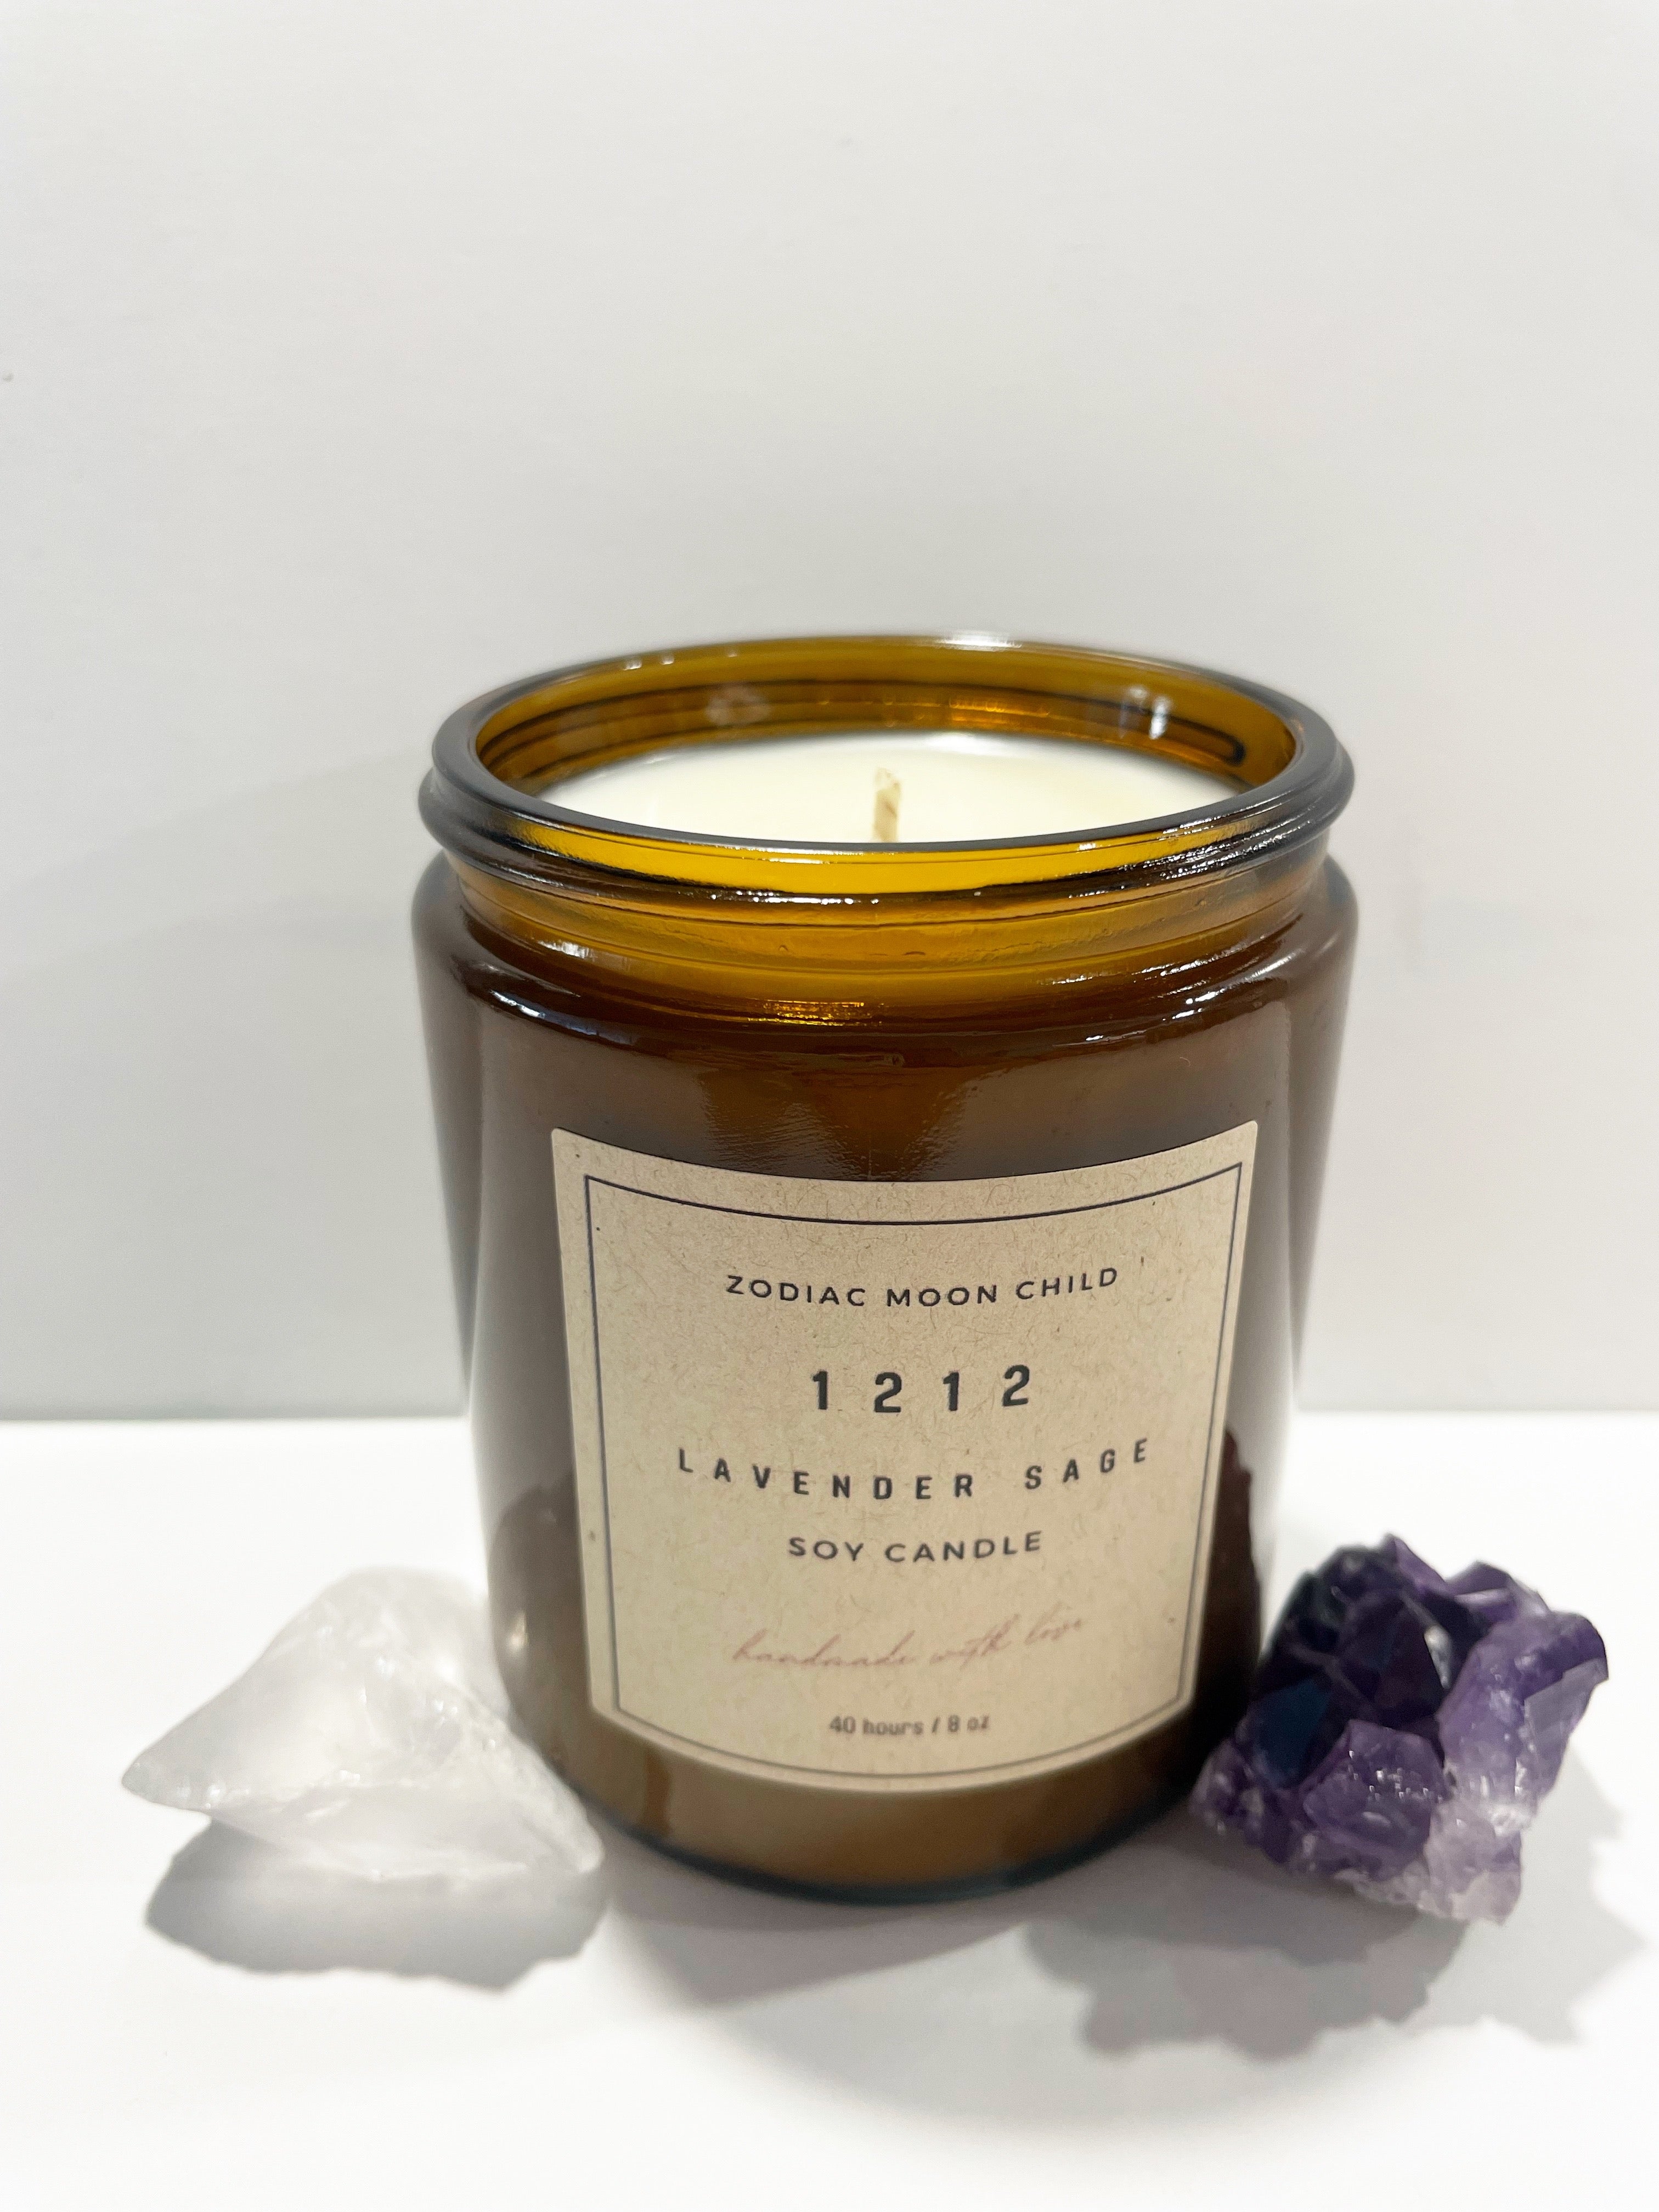 Angel Number 1212 - Tranquil Amber Spiritual Soy Candle: Enhance Positivity & Elevate Your Sacred Zen Space with 100% Natural Soy Wax, Energy